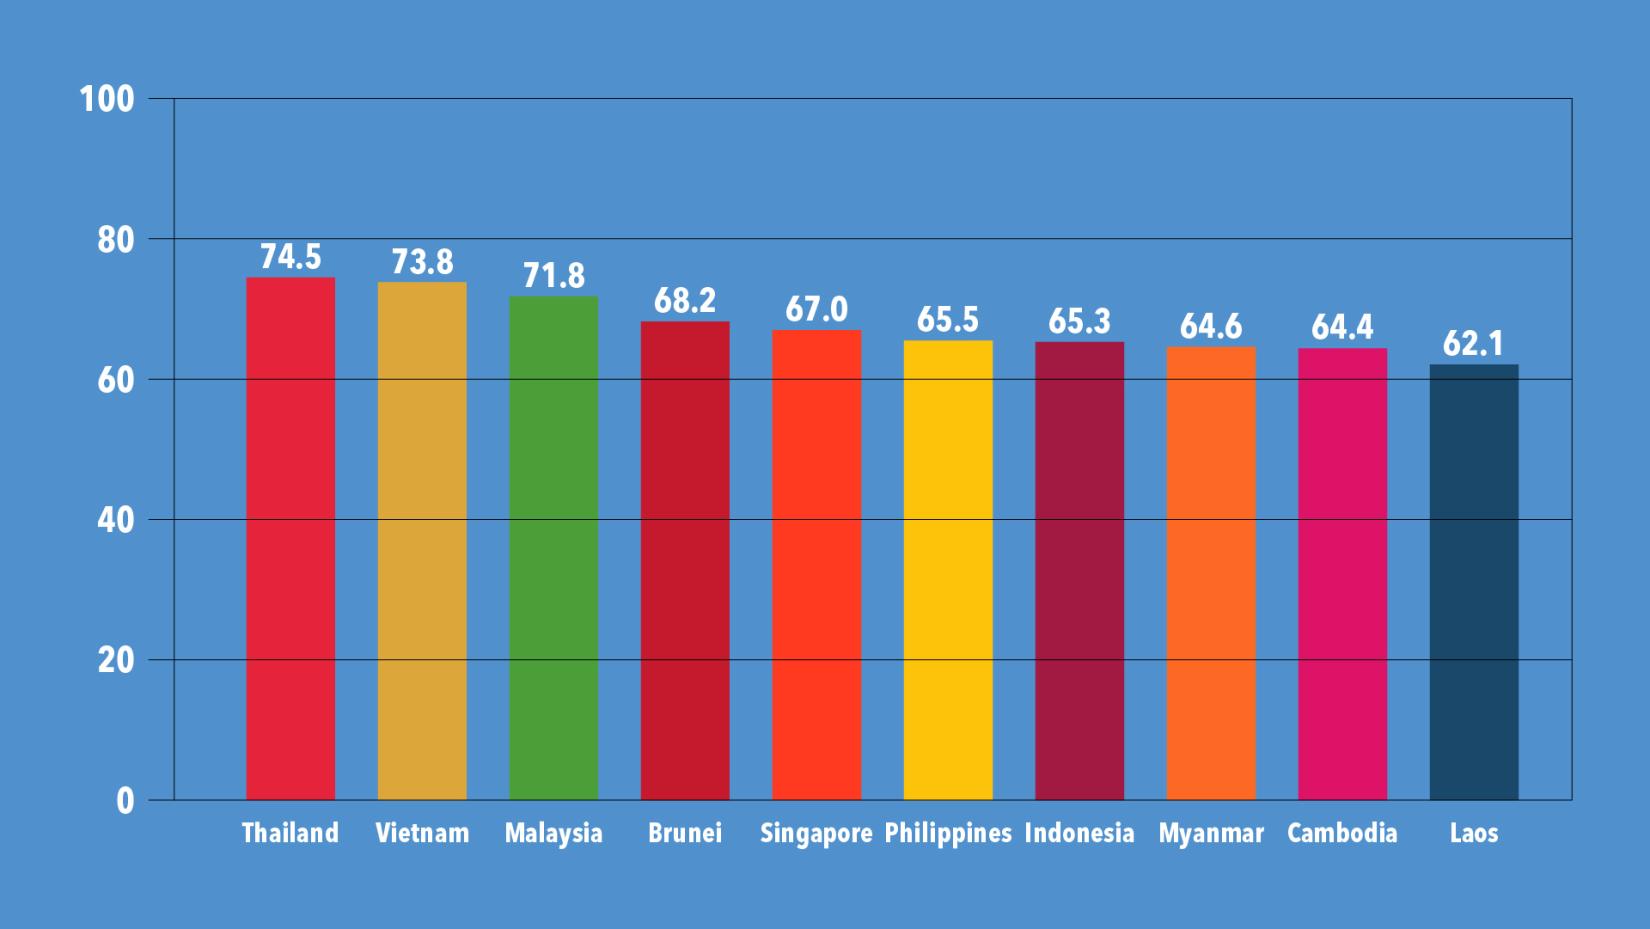 Thailand ranked first in ASEAN in the SDG index 2020